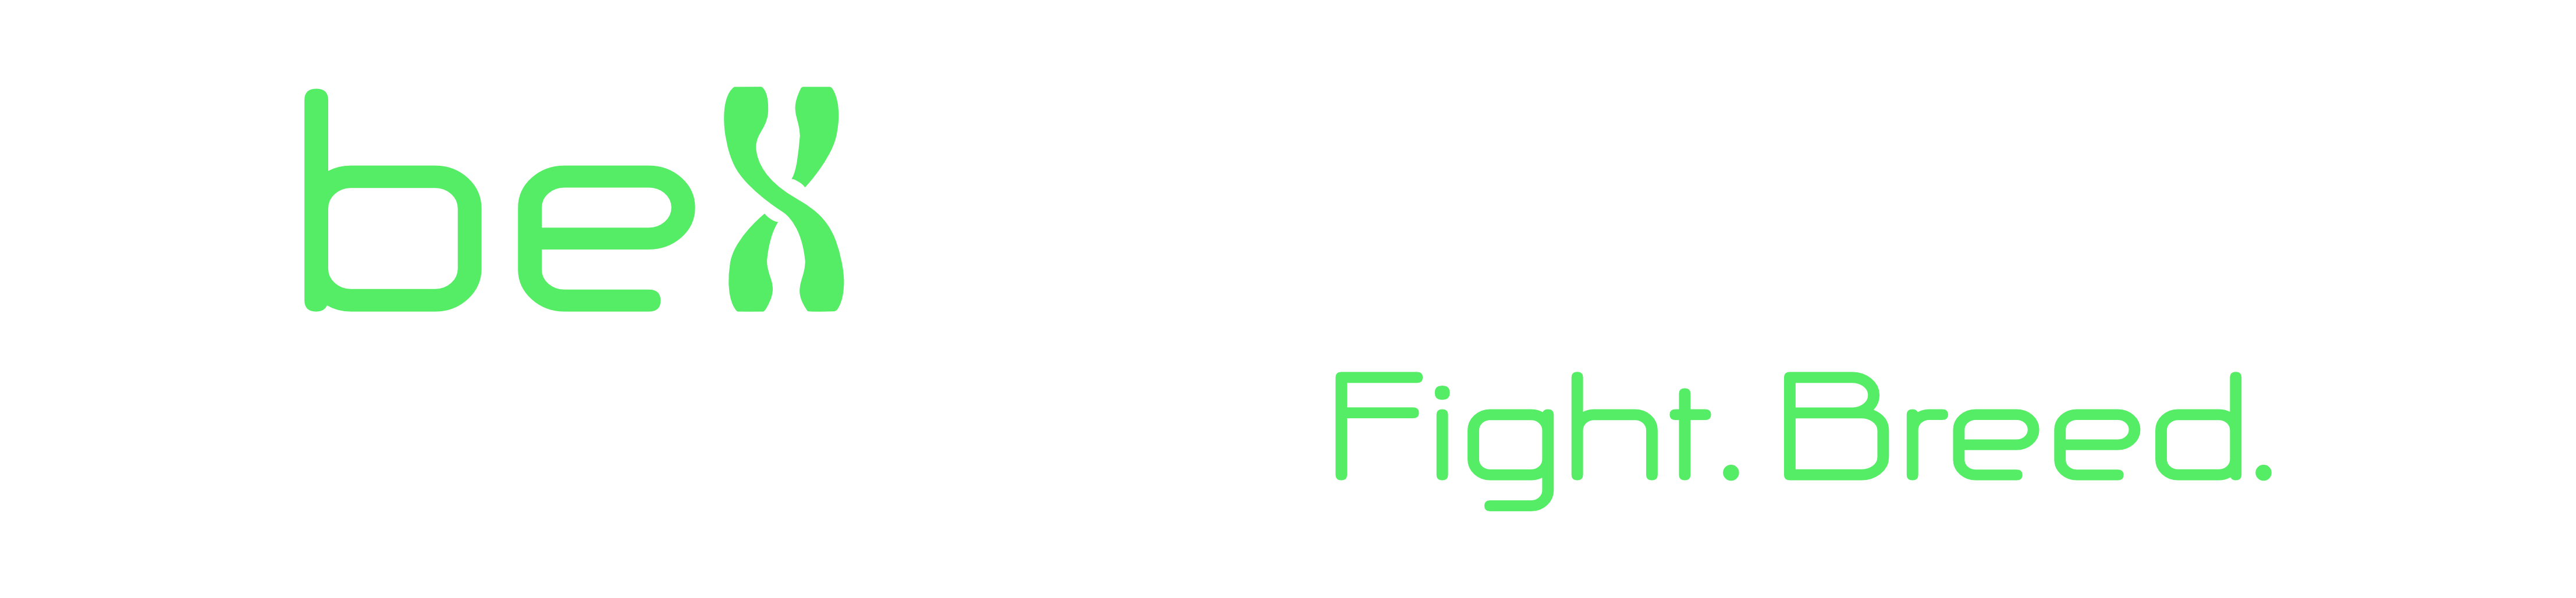 Xevolu logo. Text: be Xevolu with green accent color. The emblem is a chromosome. The claim is: Fight. Breed.